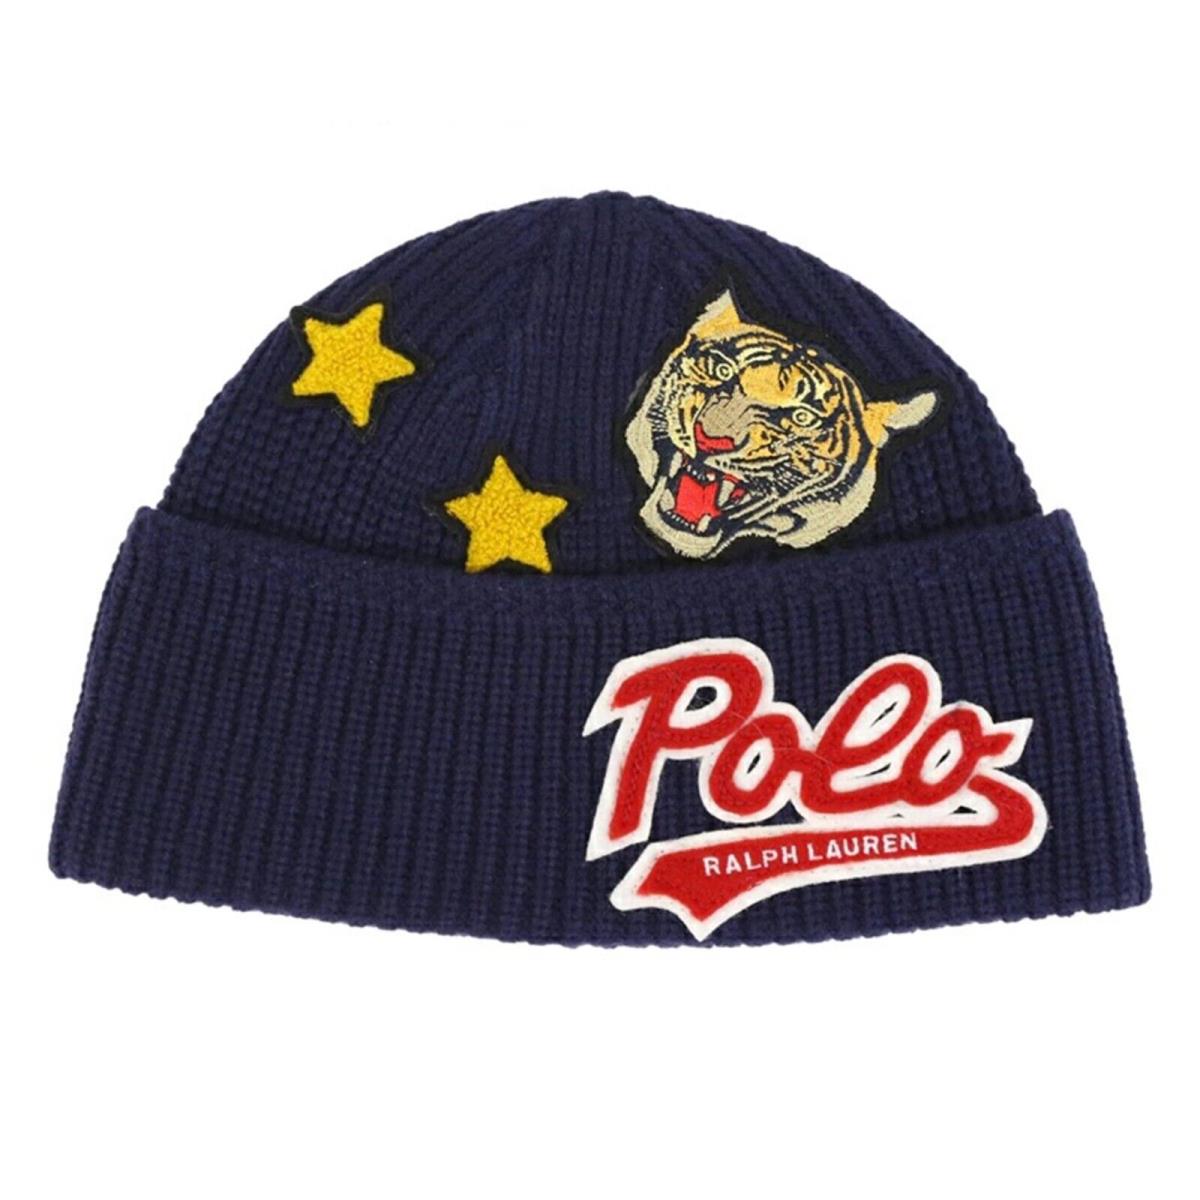 Polo Ralph Lauren Stocking Cap Hat Watch Cap Beanie with Patches Tiger Patch